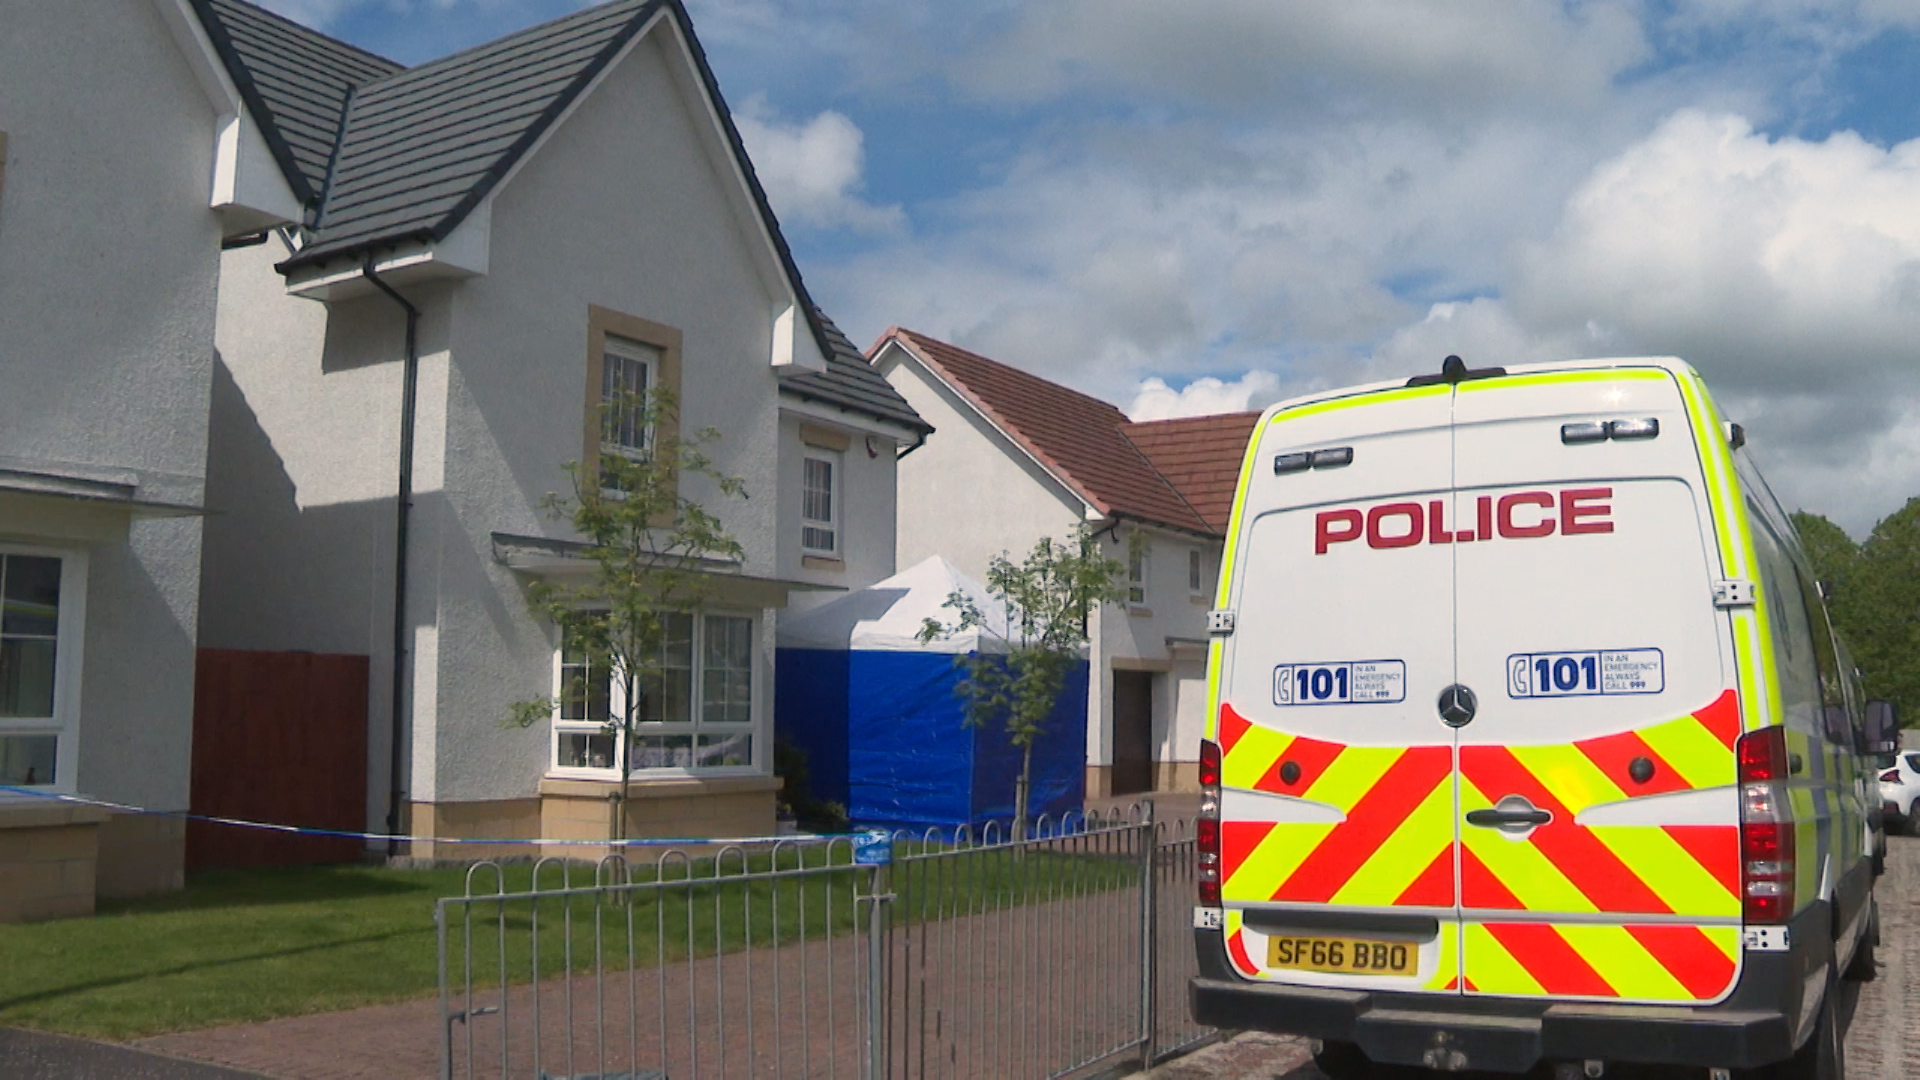 Police cordoned off Willox's home in Monkton during the search.